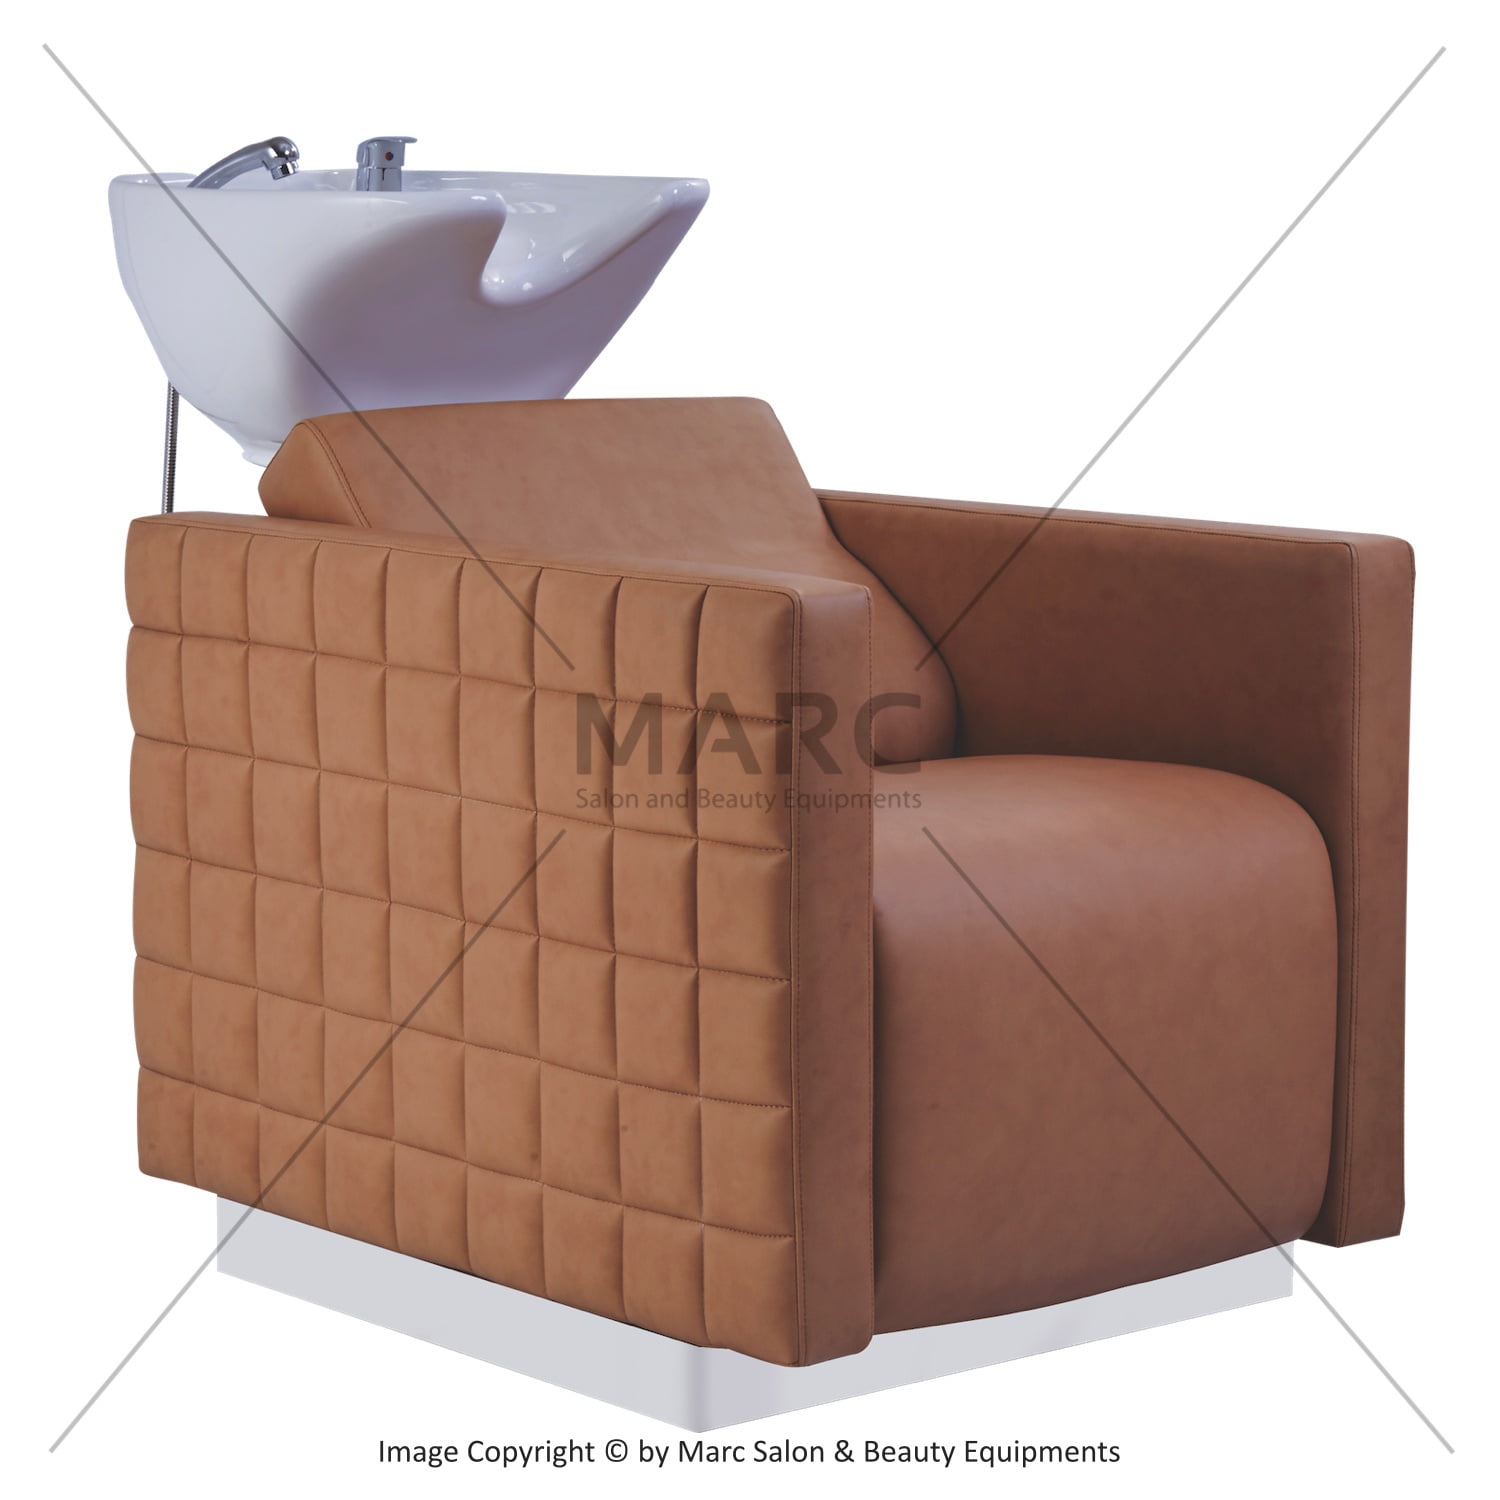 backwash chair in Bangalore